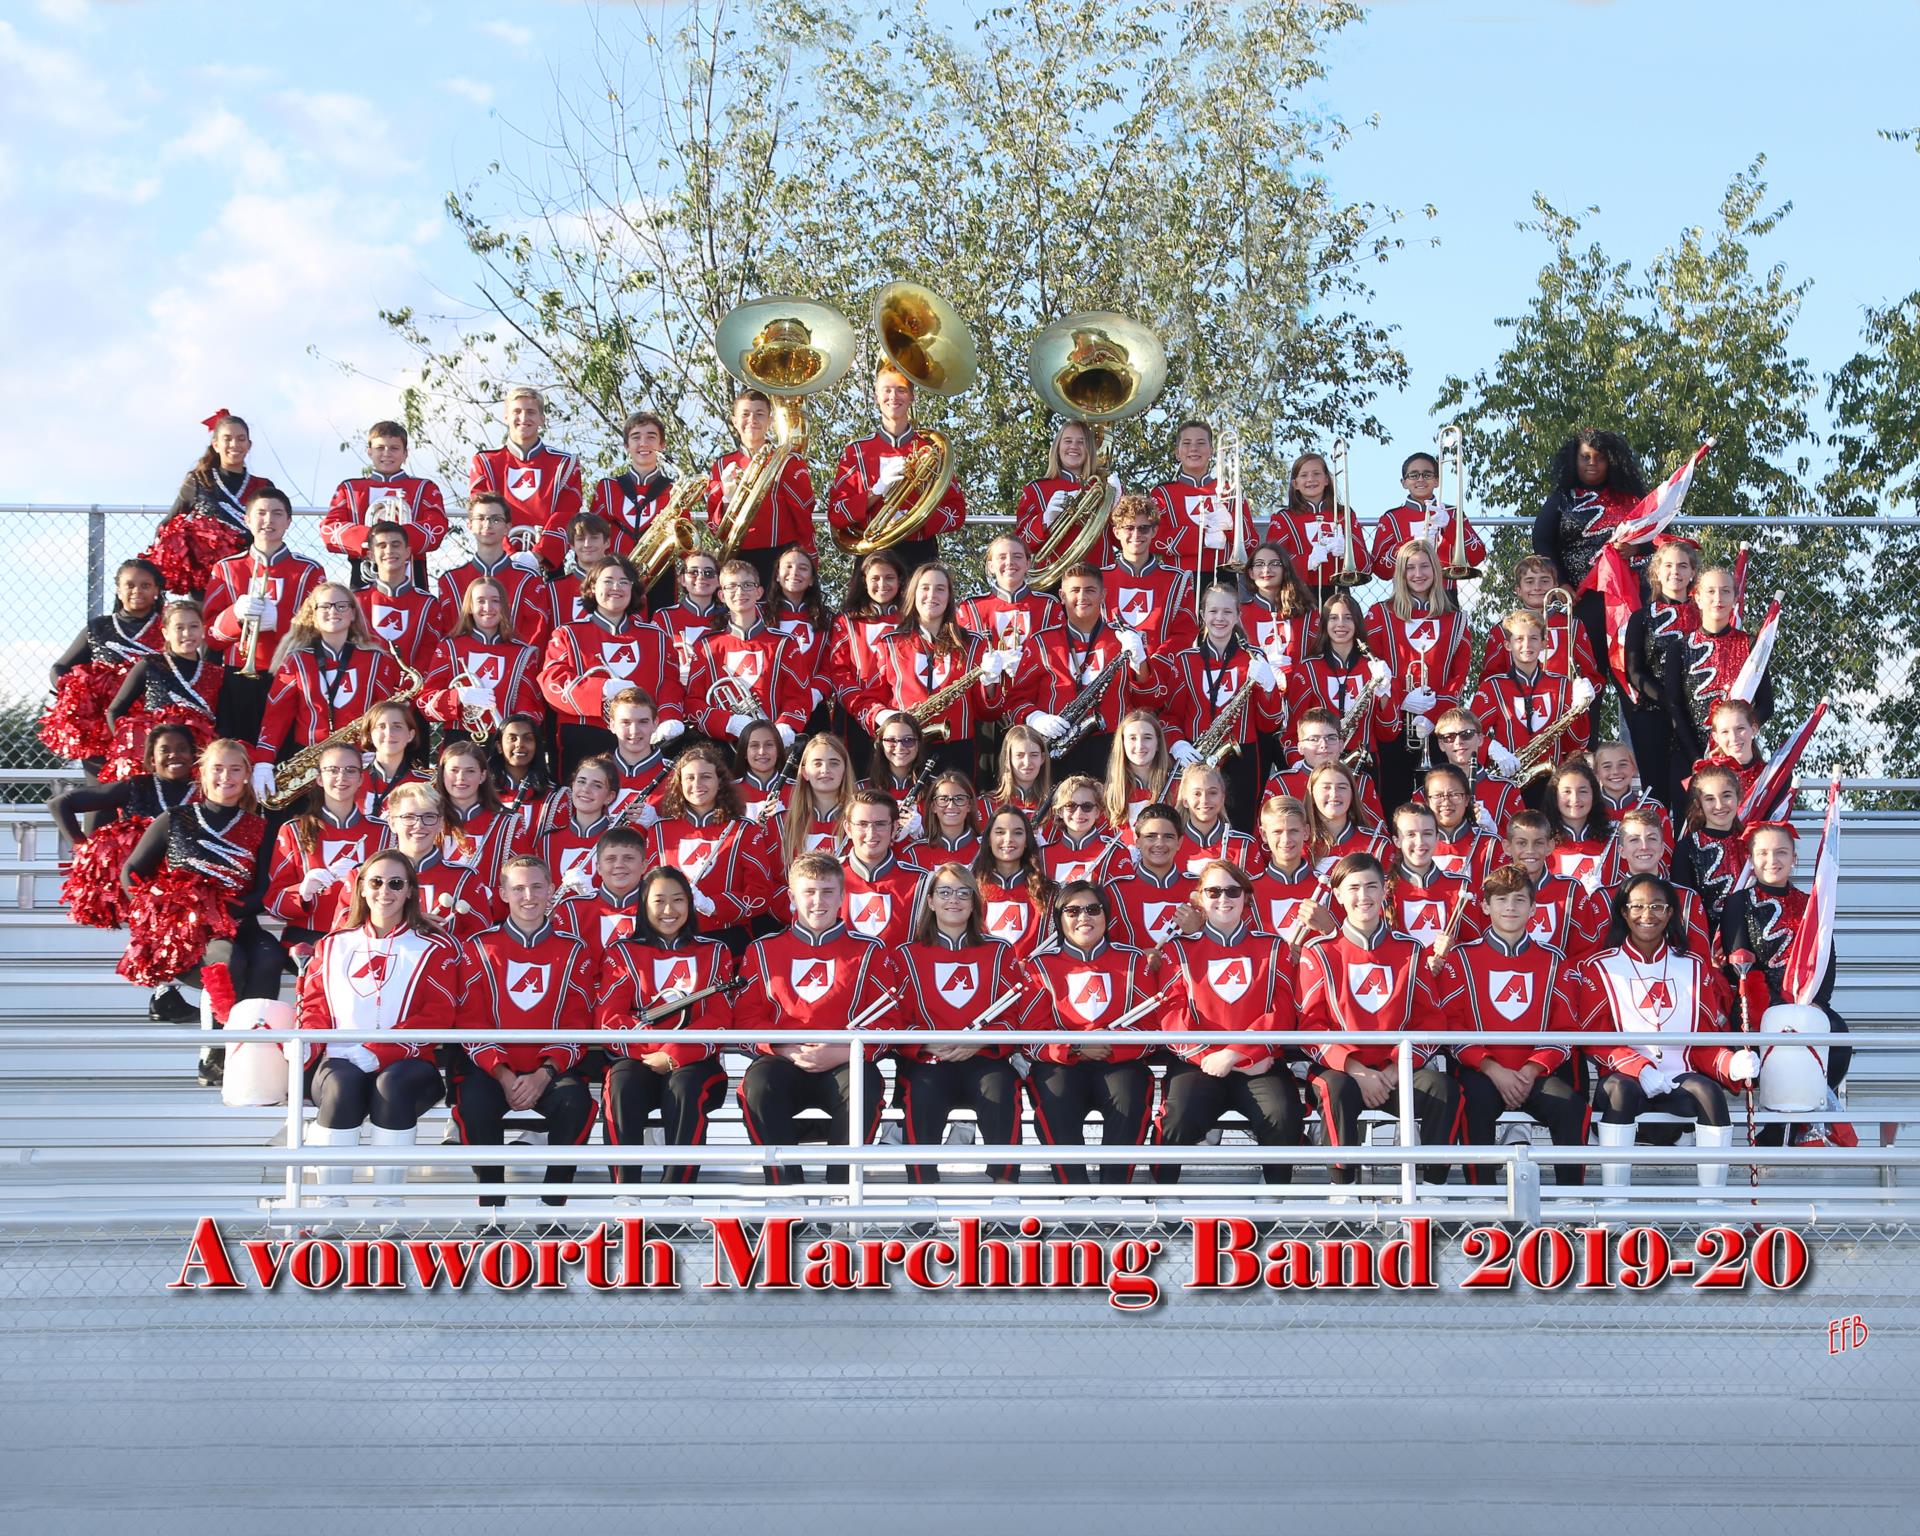 Avonworth Band Boosters Association